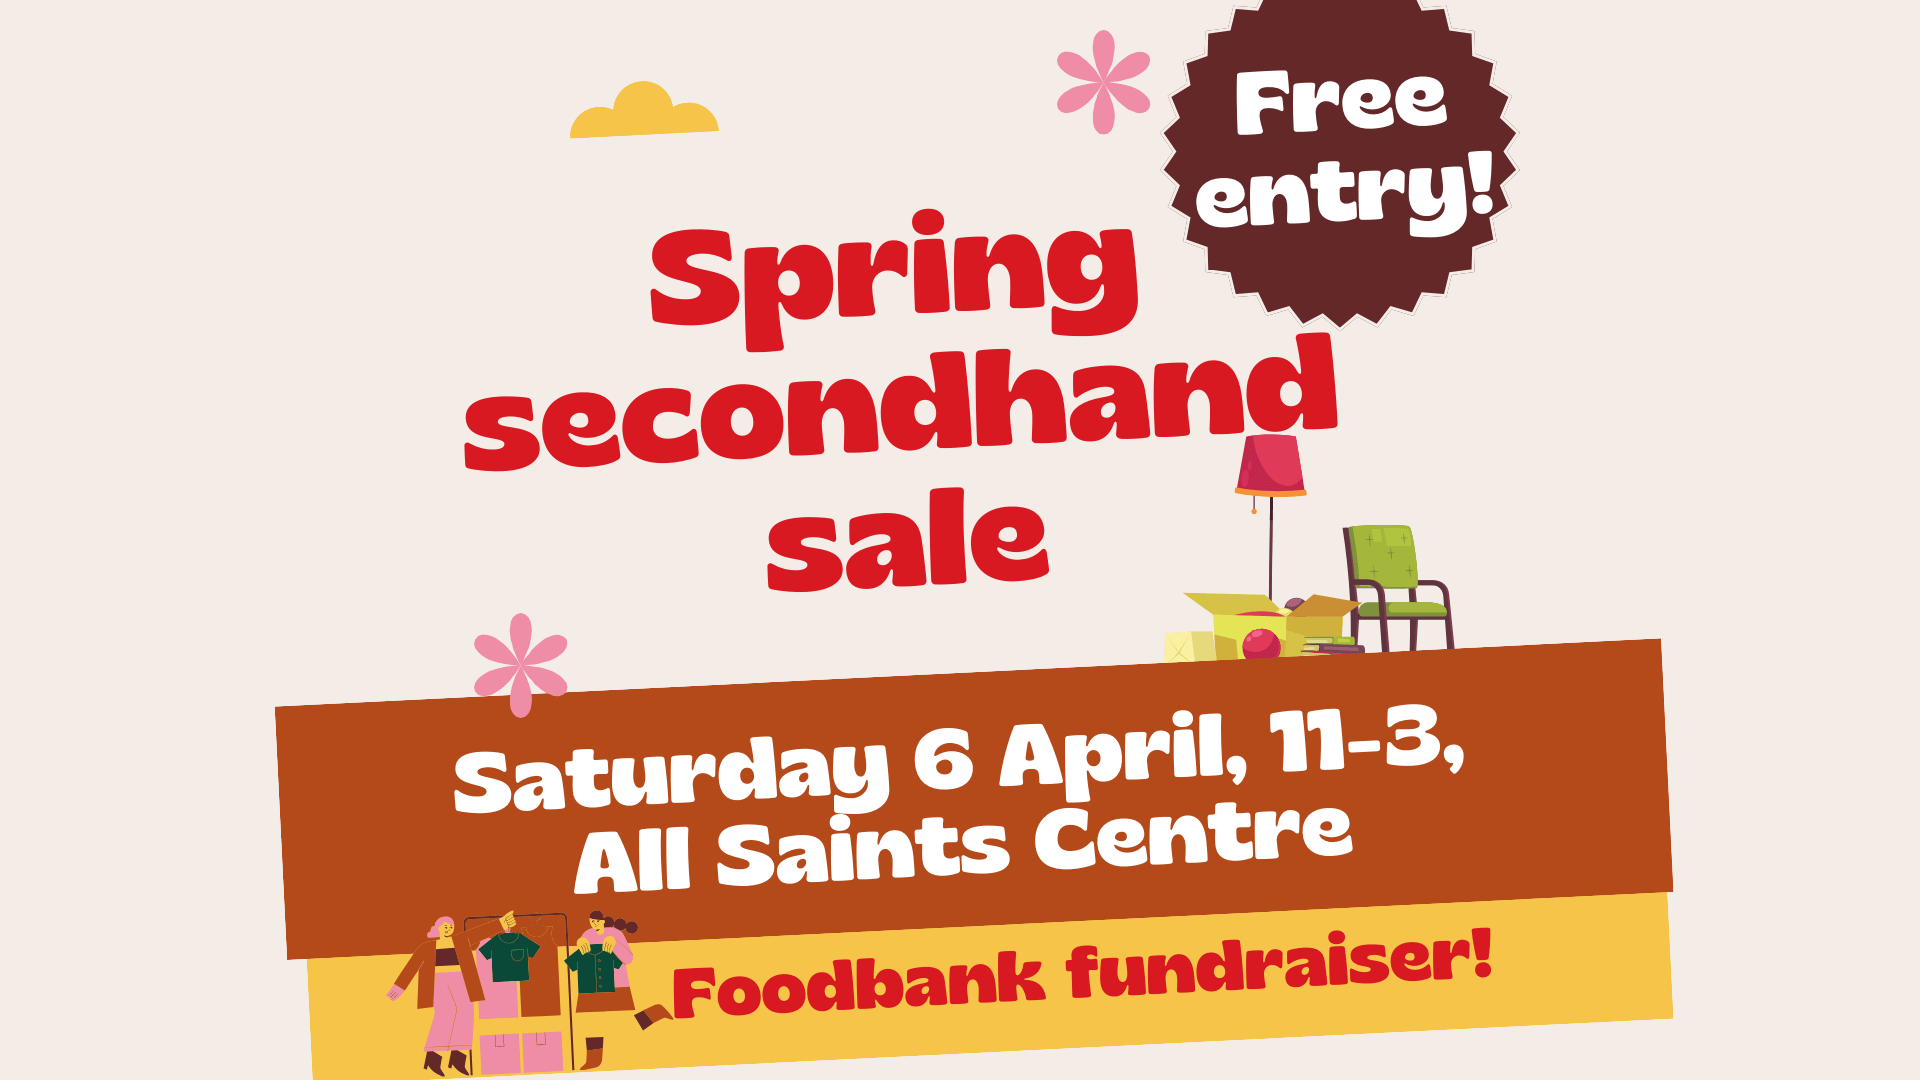 Spring secondhand sale at the All Saints Centre graphic